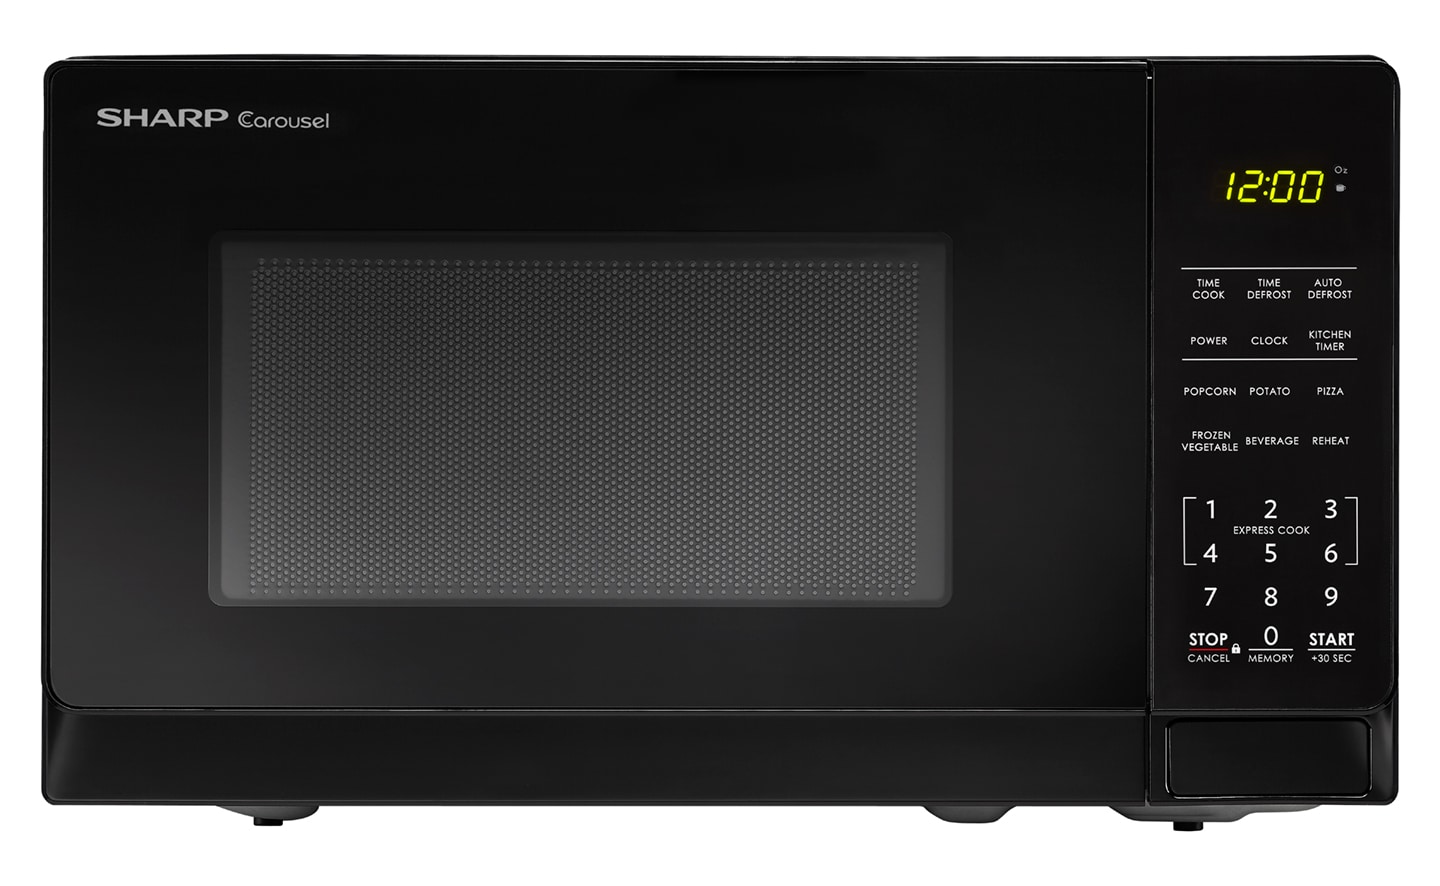 SMC0711BS 0.7 Cu Ft Stainless Steel Carousel Microwave